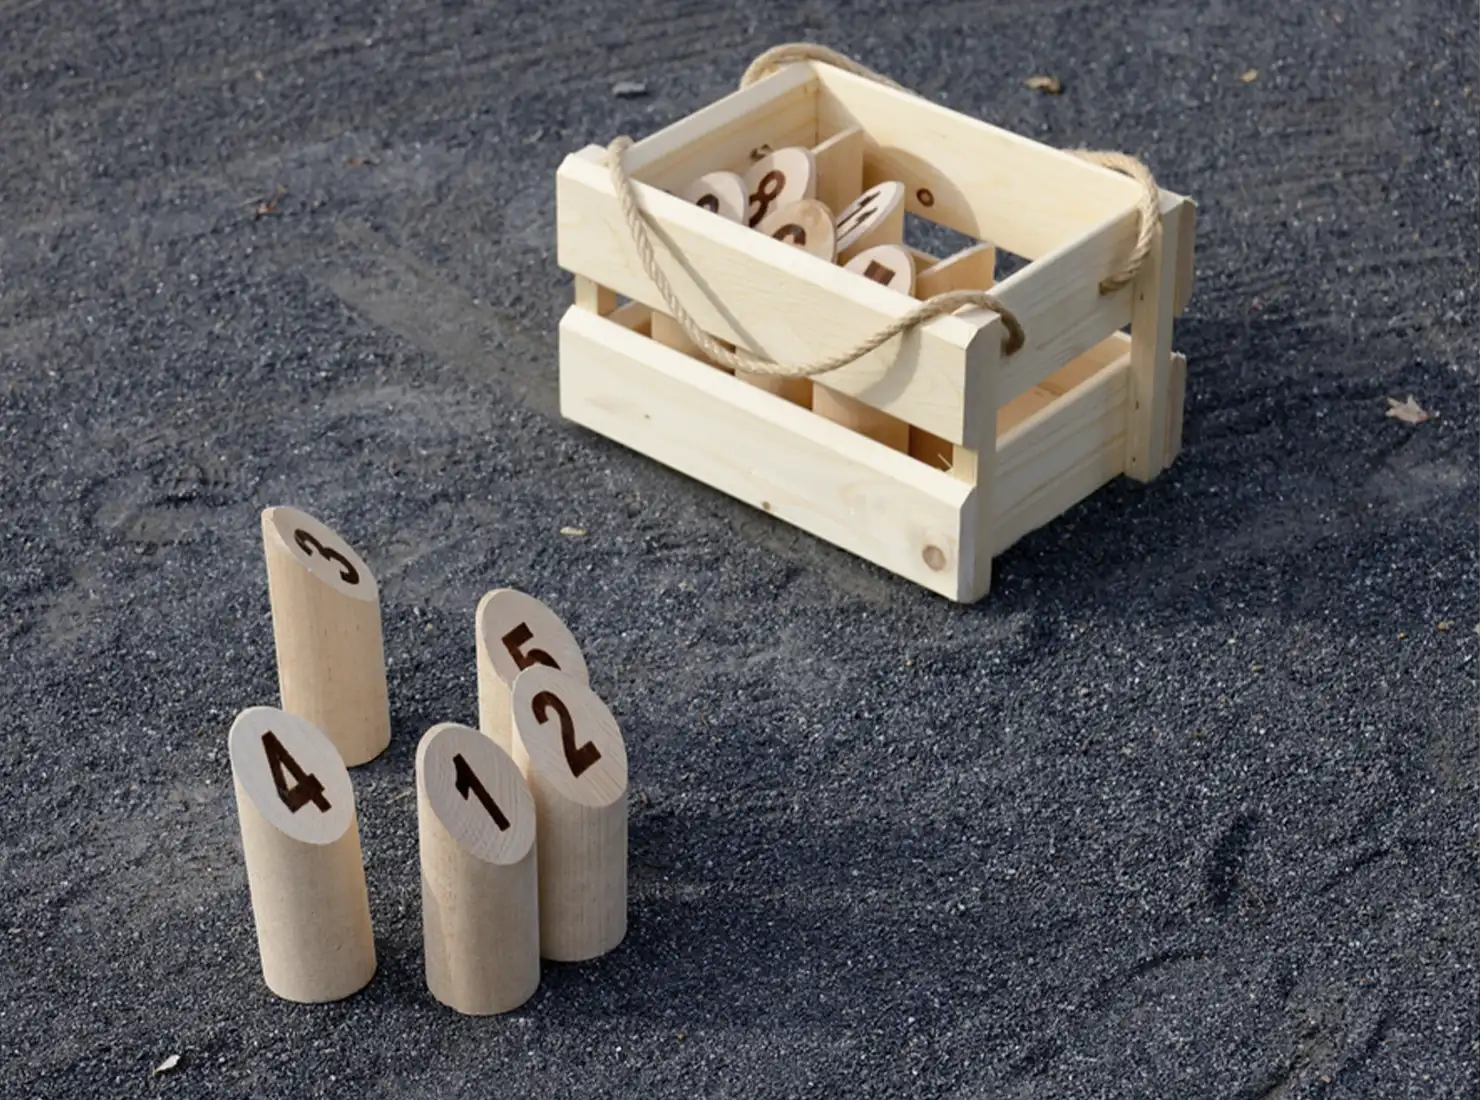 Mölkky-best outdoor games for your backyard